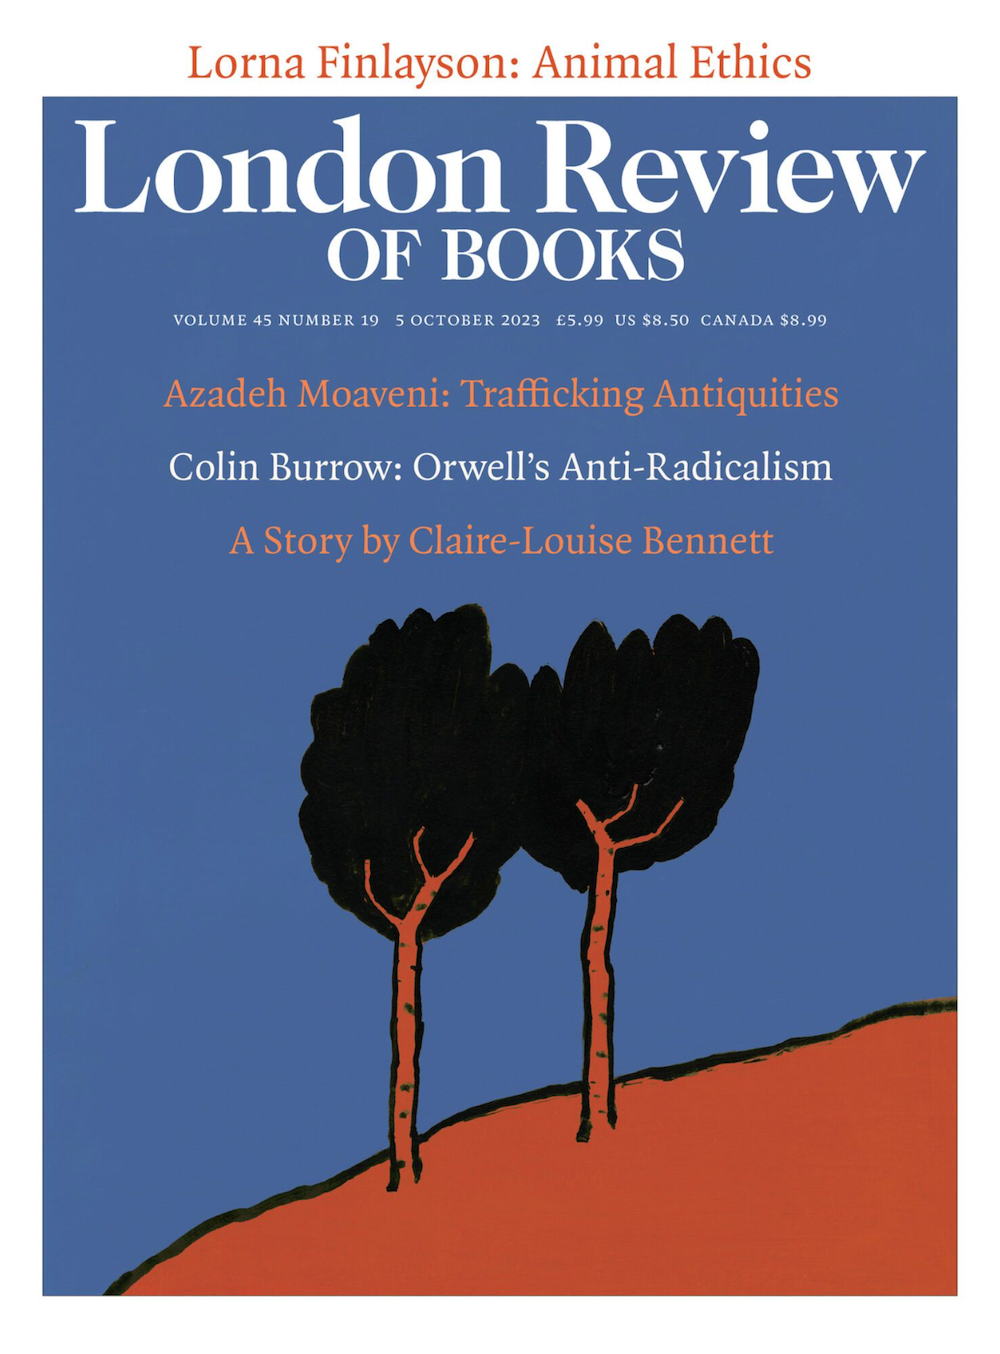 The London Review of Books, October 5, 2023